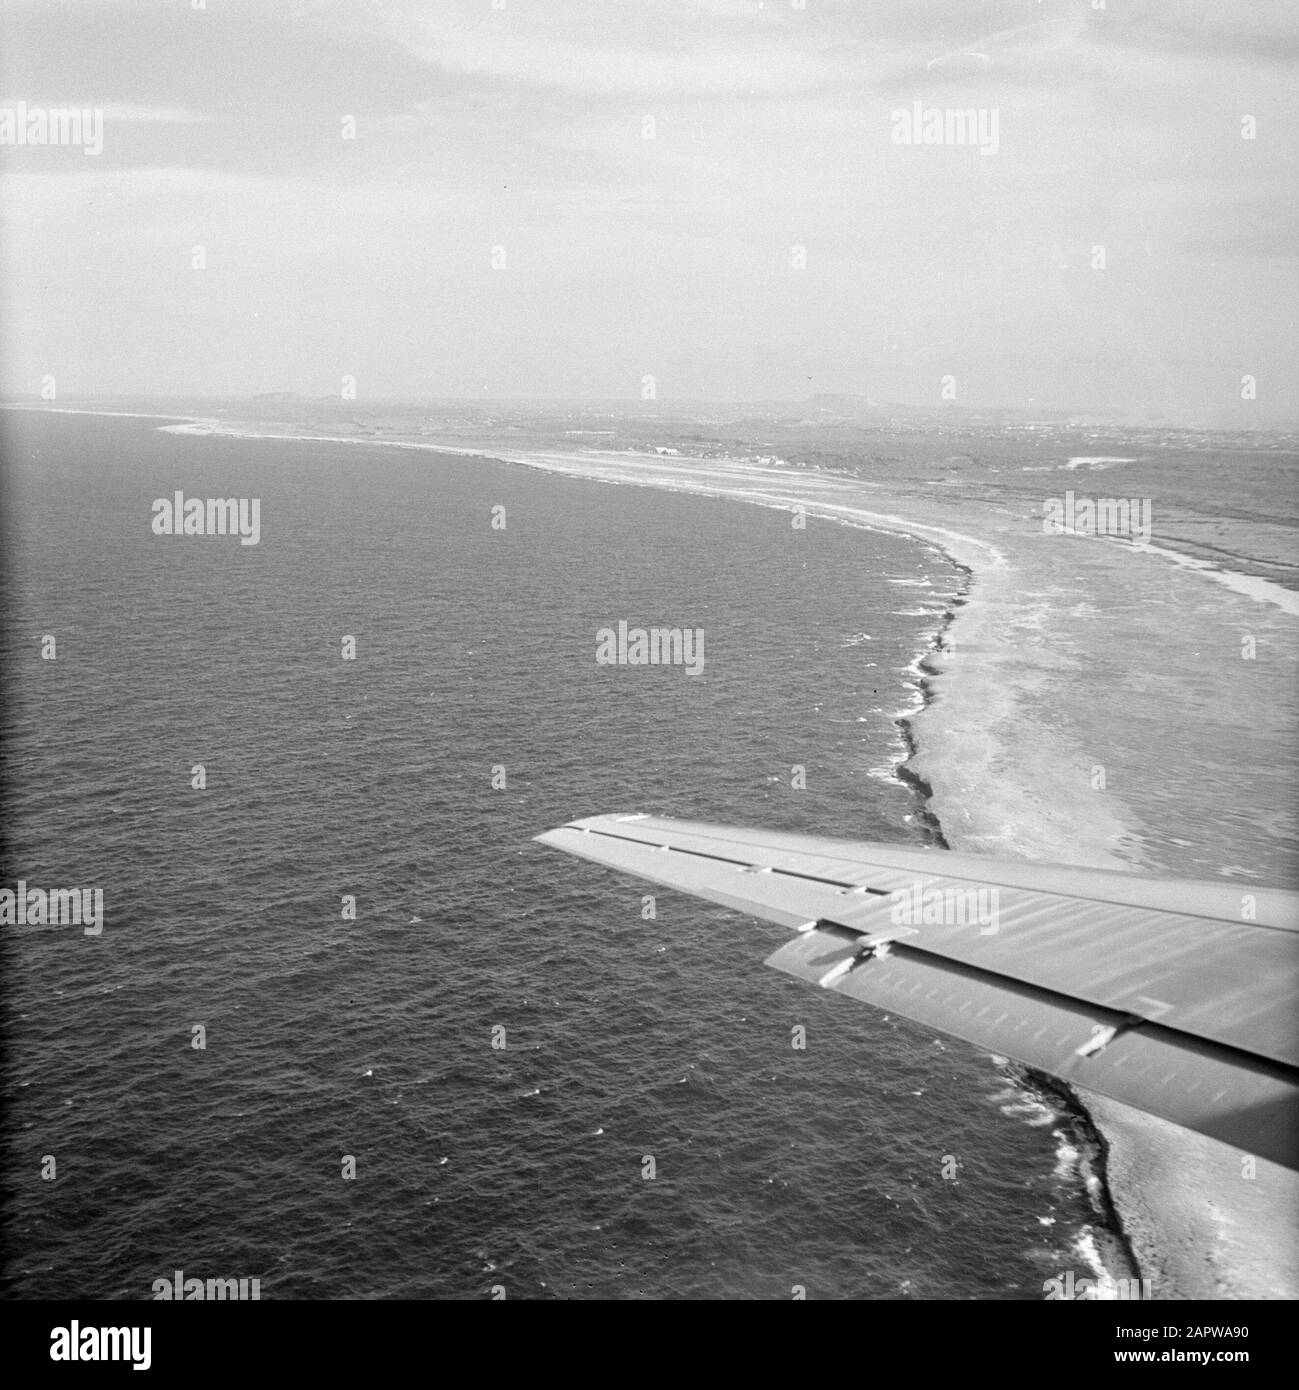 Dutch Antilles and Suriname at the time of the royal visit of Queen Juliana and Prince Bernhard in 1955  Coastal Landscape, probably Curaçao, seen from an airplane Date: 1 October 1955 Location: Netherlands Antilles, Suriname Keywords: coast, aerial photographs Stock Photo